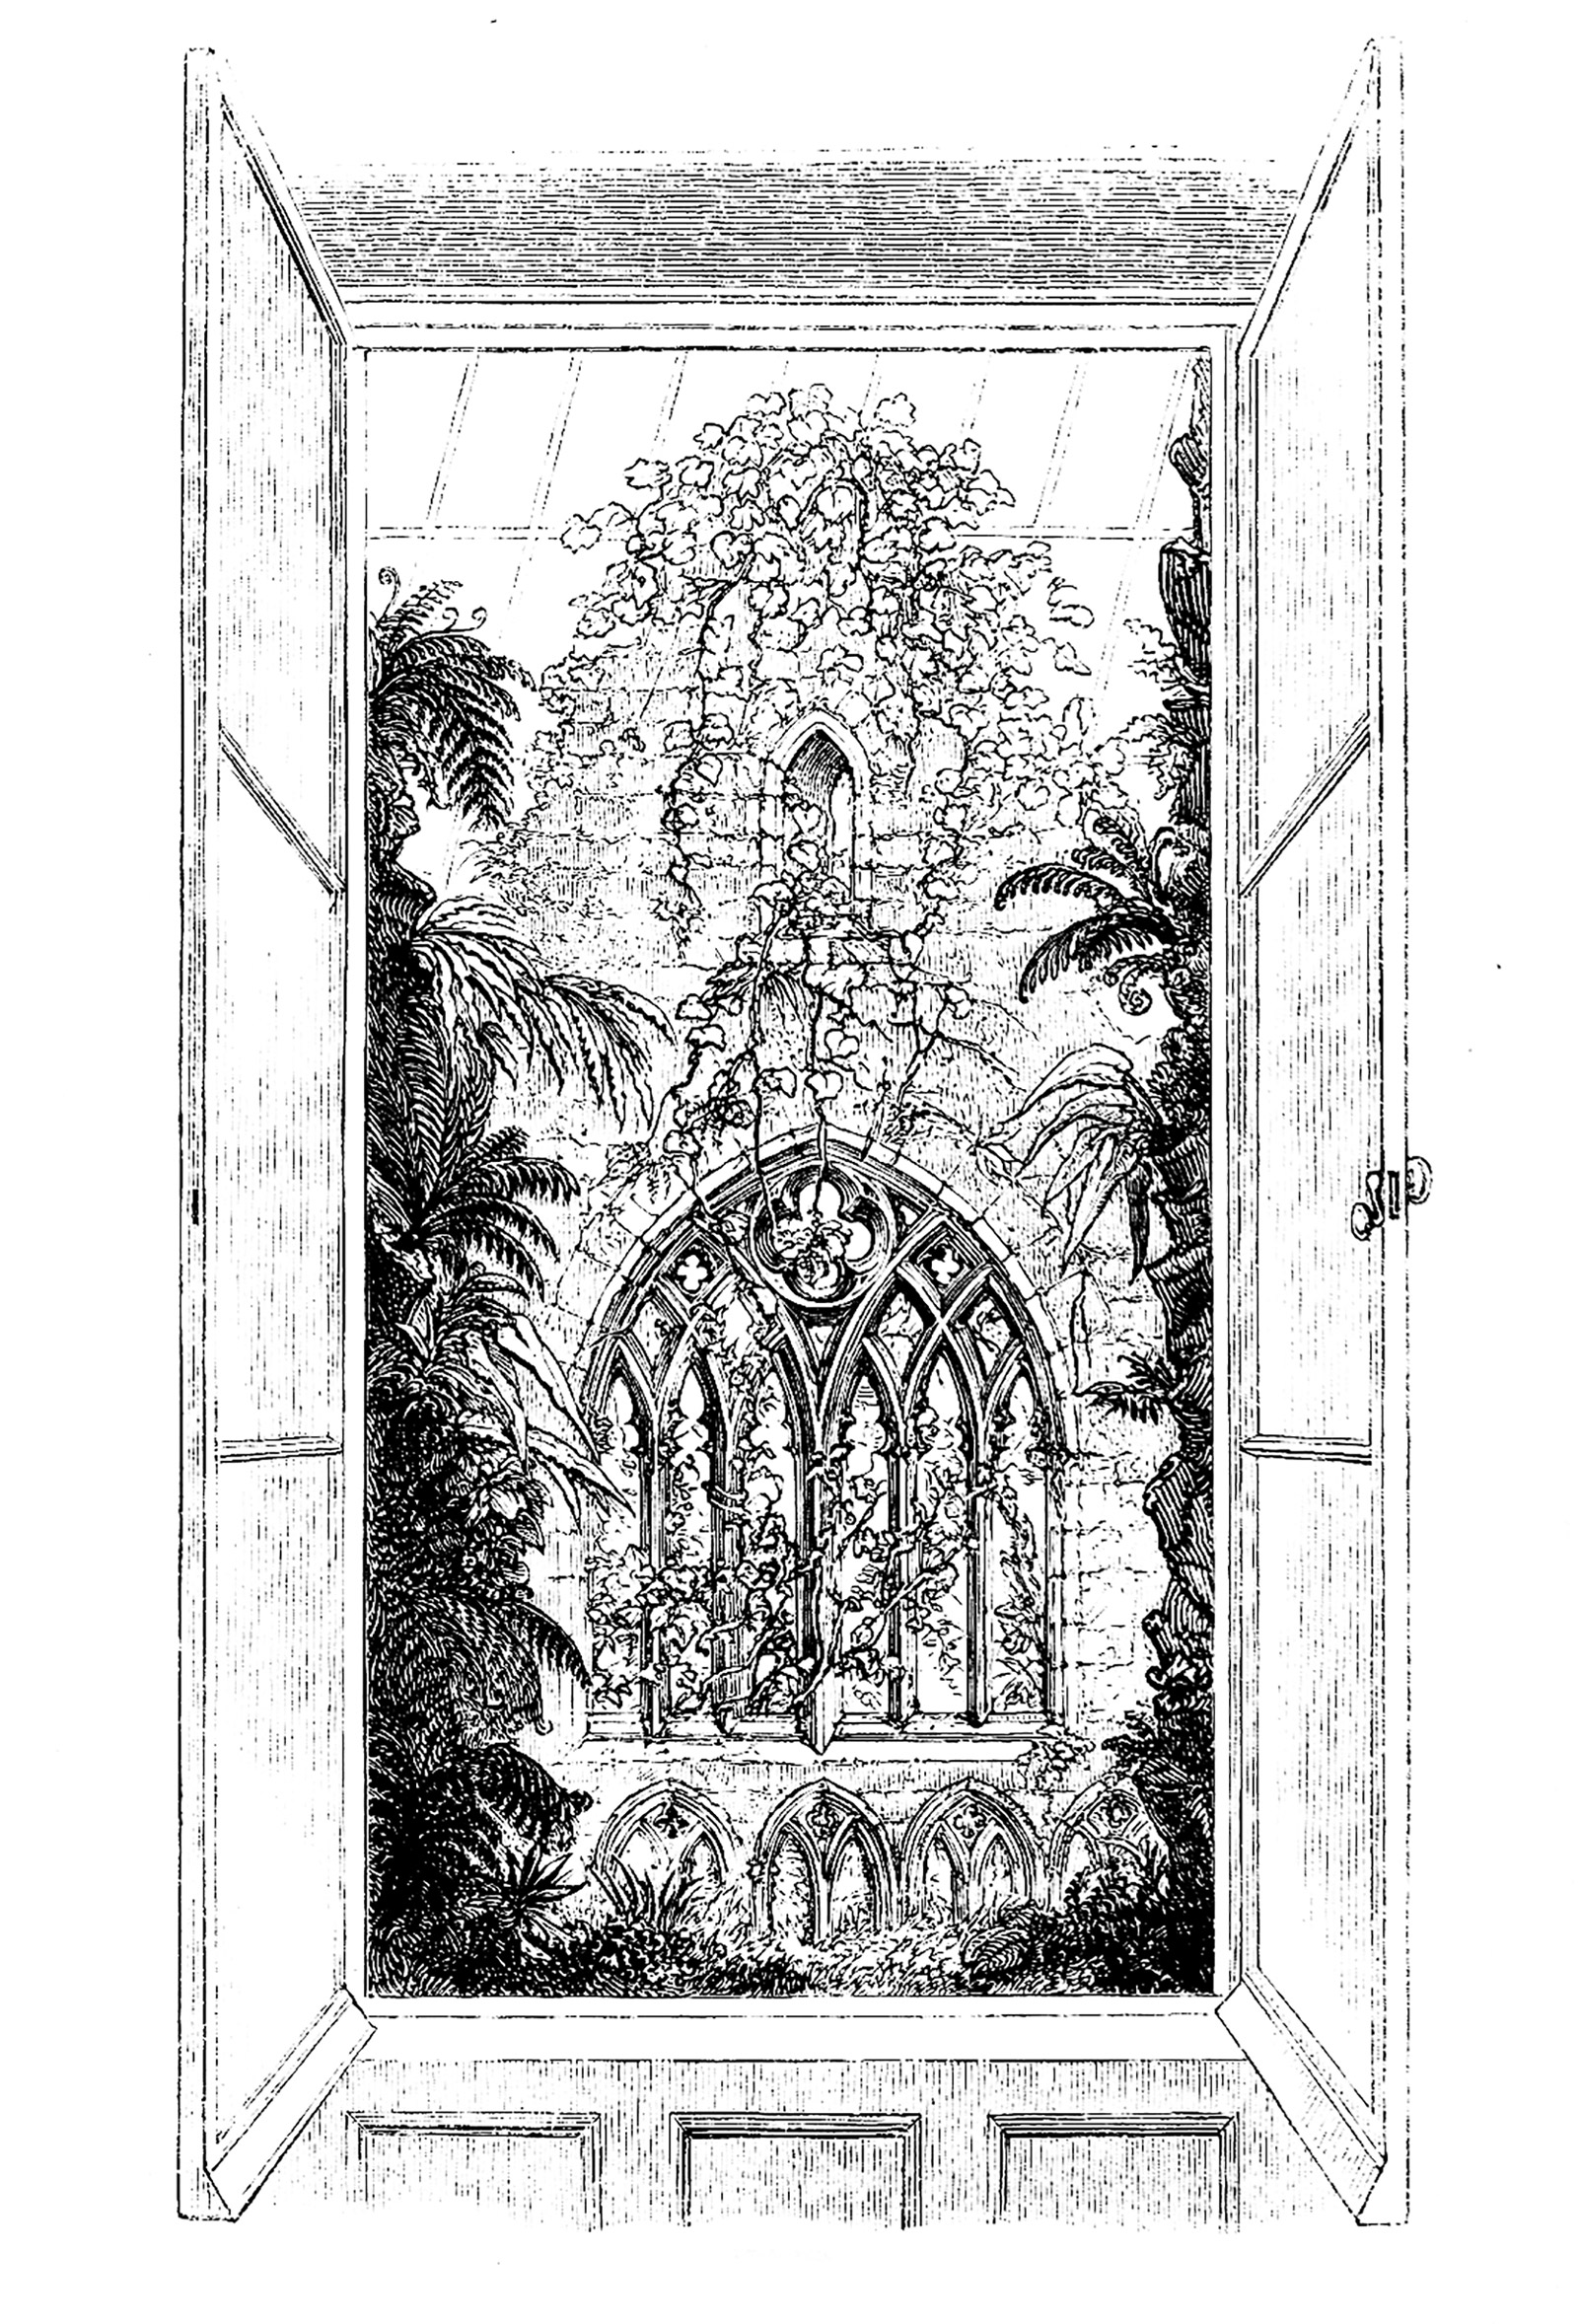 Large Wardian cases could be attached to the exteriors of windows. In one of the most famous designs, the plants framed a model of the ruins of Tintern Abbey. Illustration from 1852 edition of Nathaniel Ward’s On the Growth of Plants in Closely Glazed Cases.